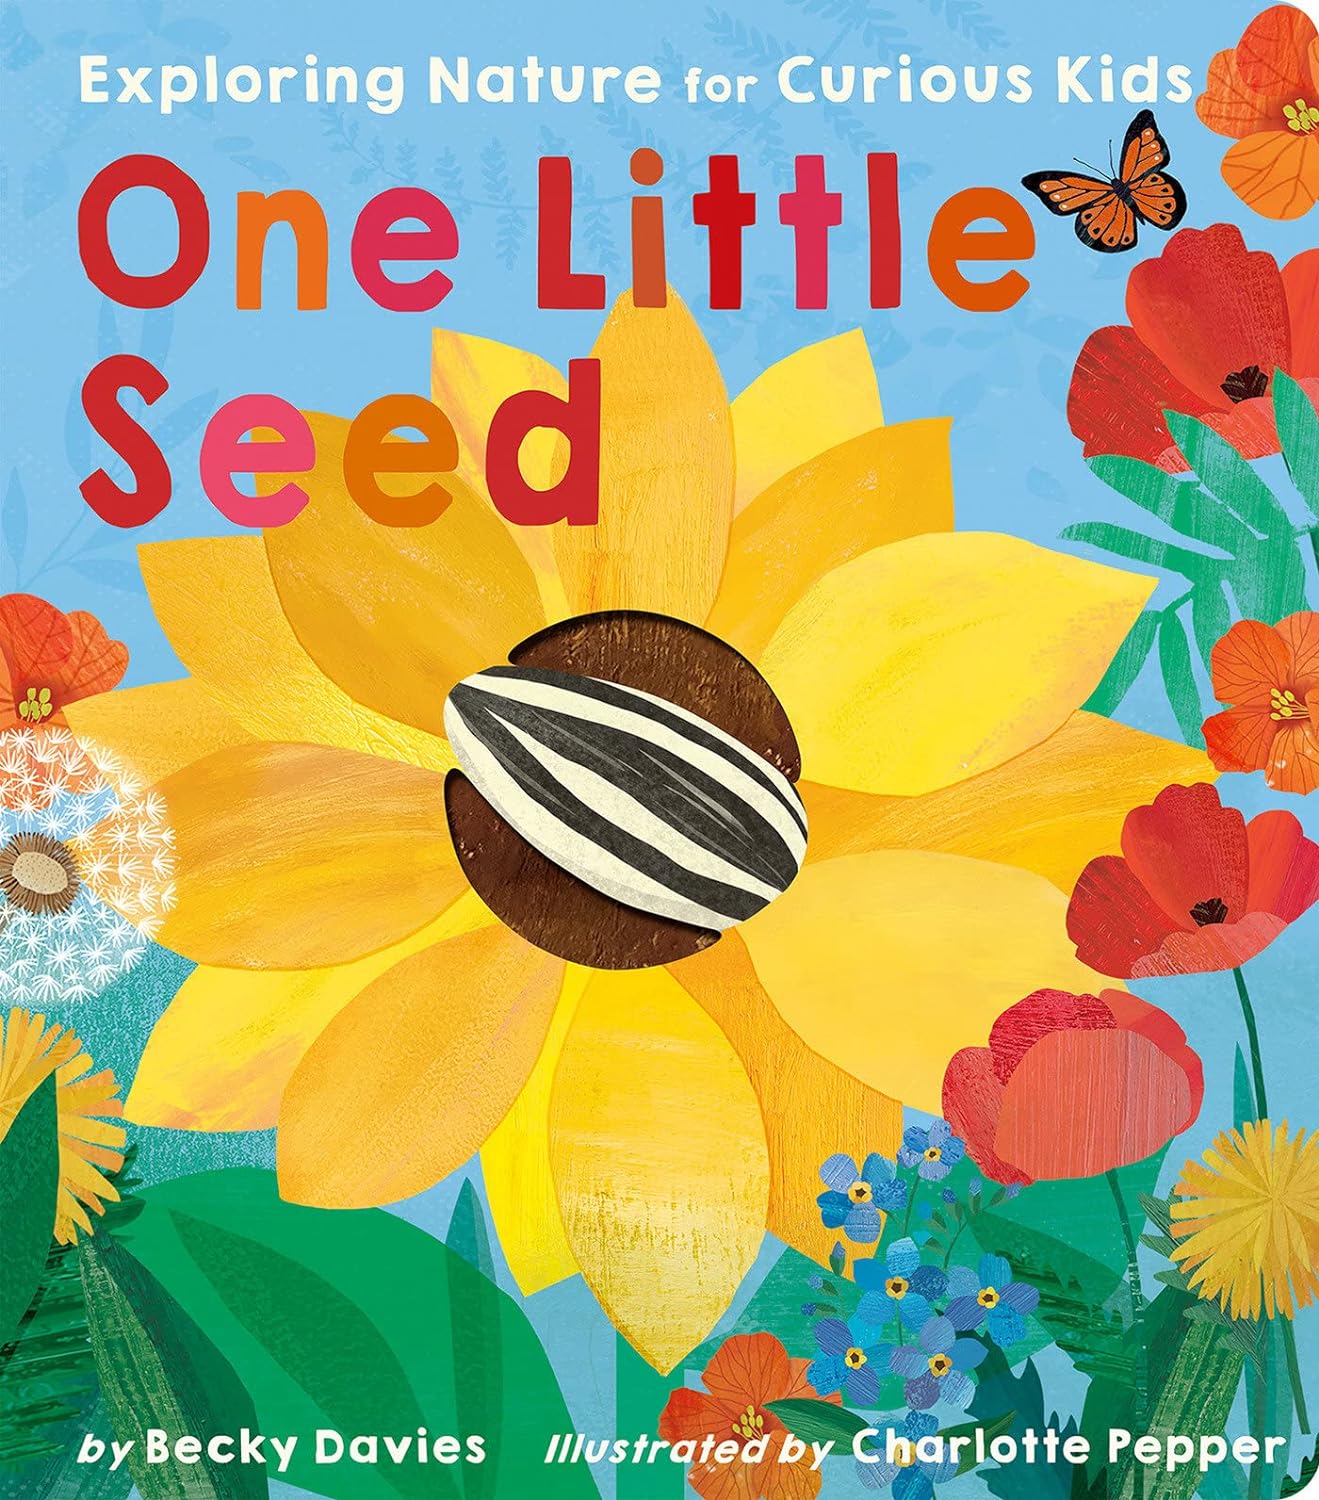 little tiger One Little Seed: Exploring Nature for Curious Kids Board book – Lift the flap,  by Becky Davies (Author), Charlotte Pepper (Illustrator) Hardcover